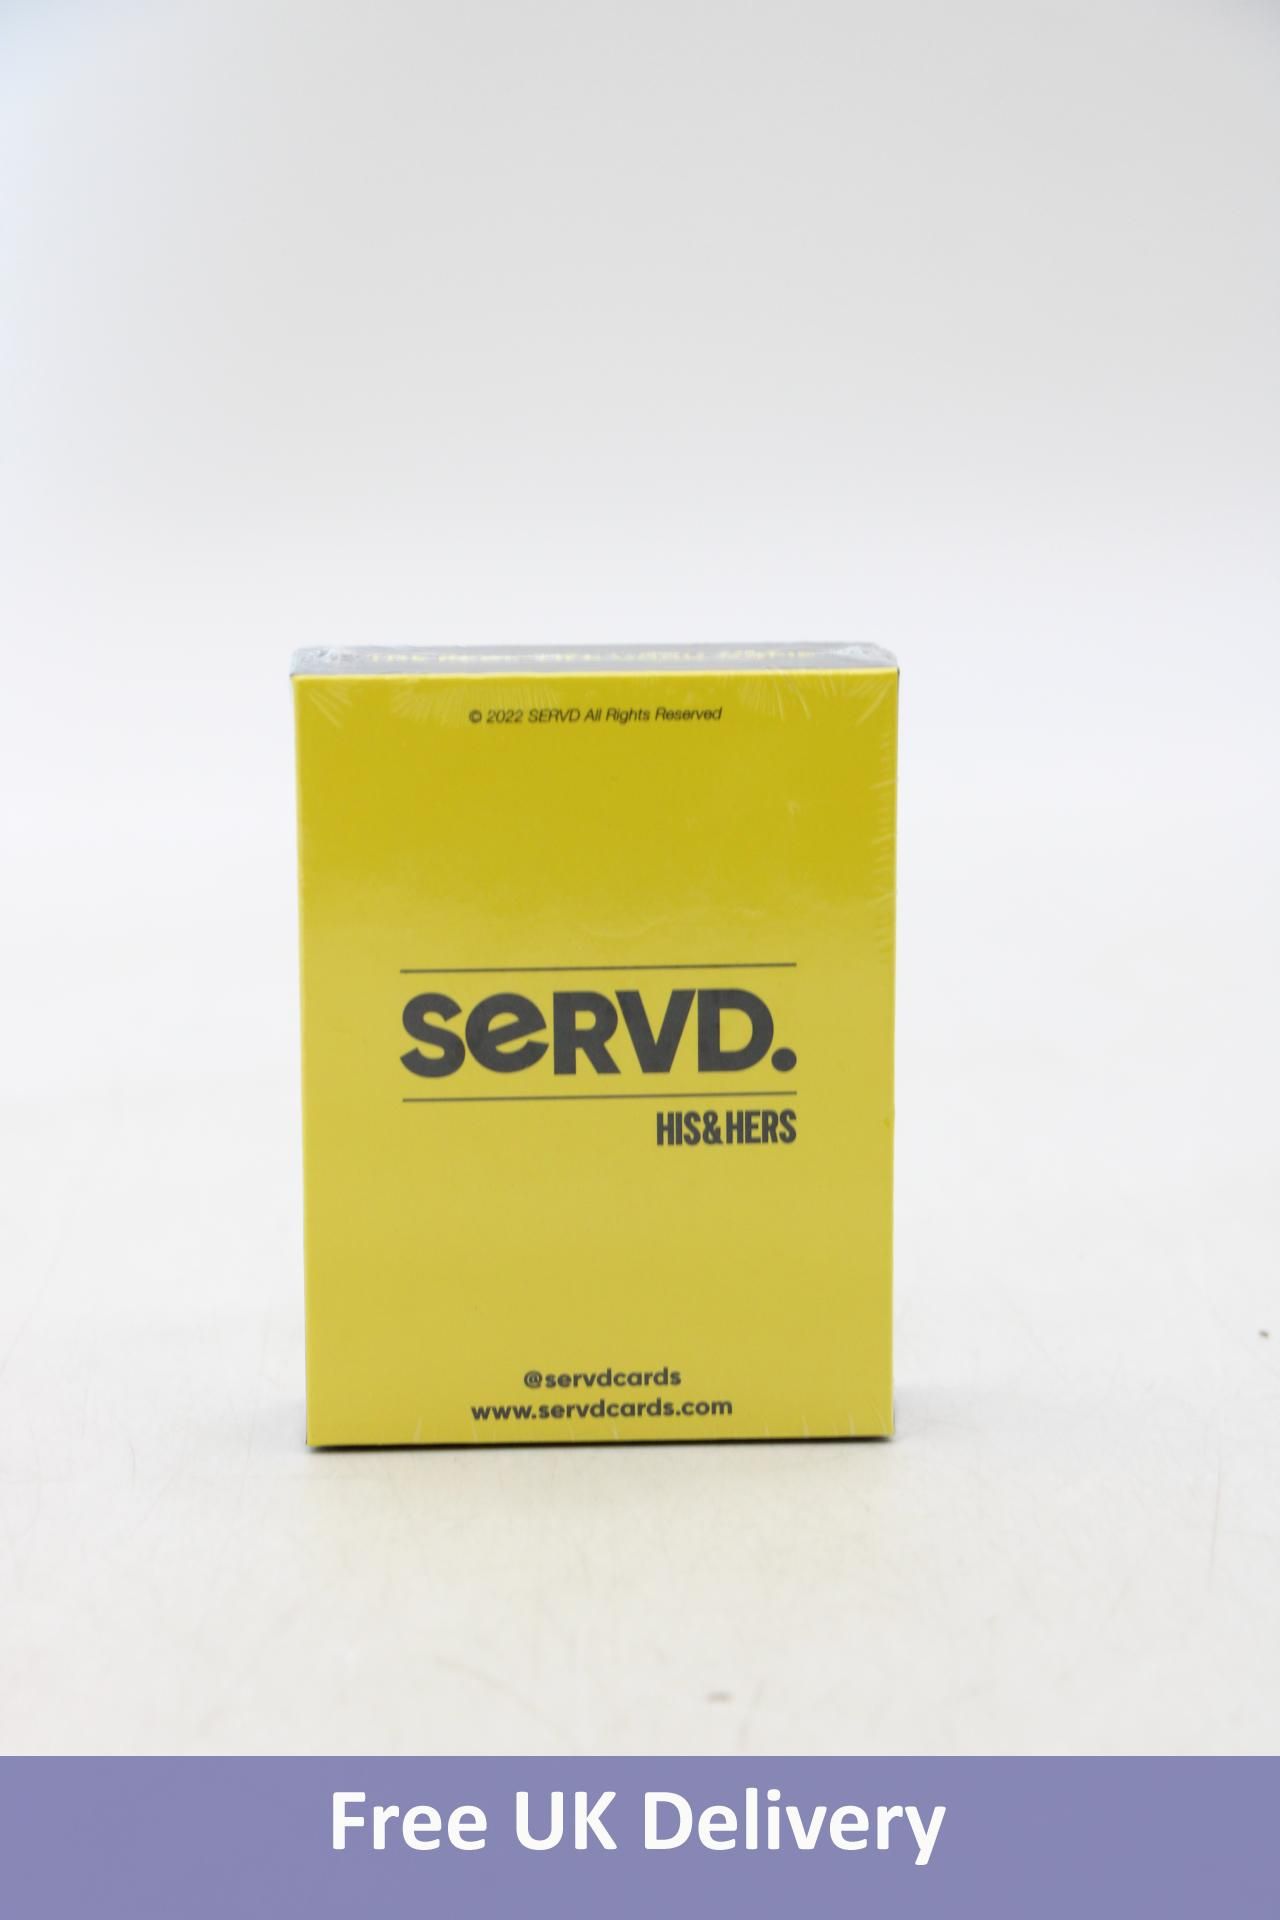 Twenty-four packs of Servd His & Her, The Hilarious Real-Life Couples Card Game - Image 5 of 8